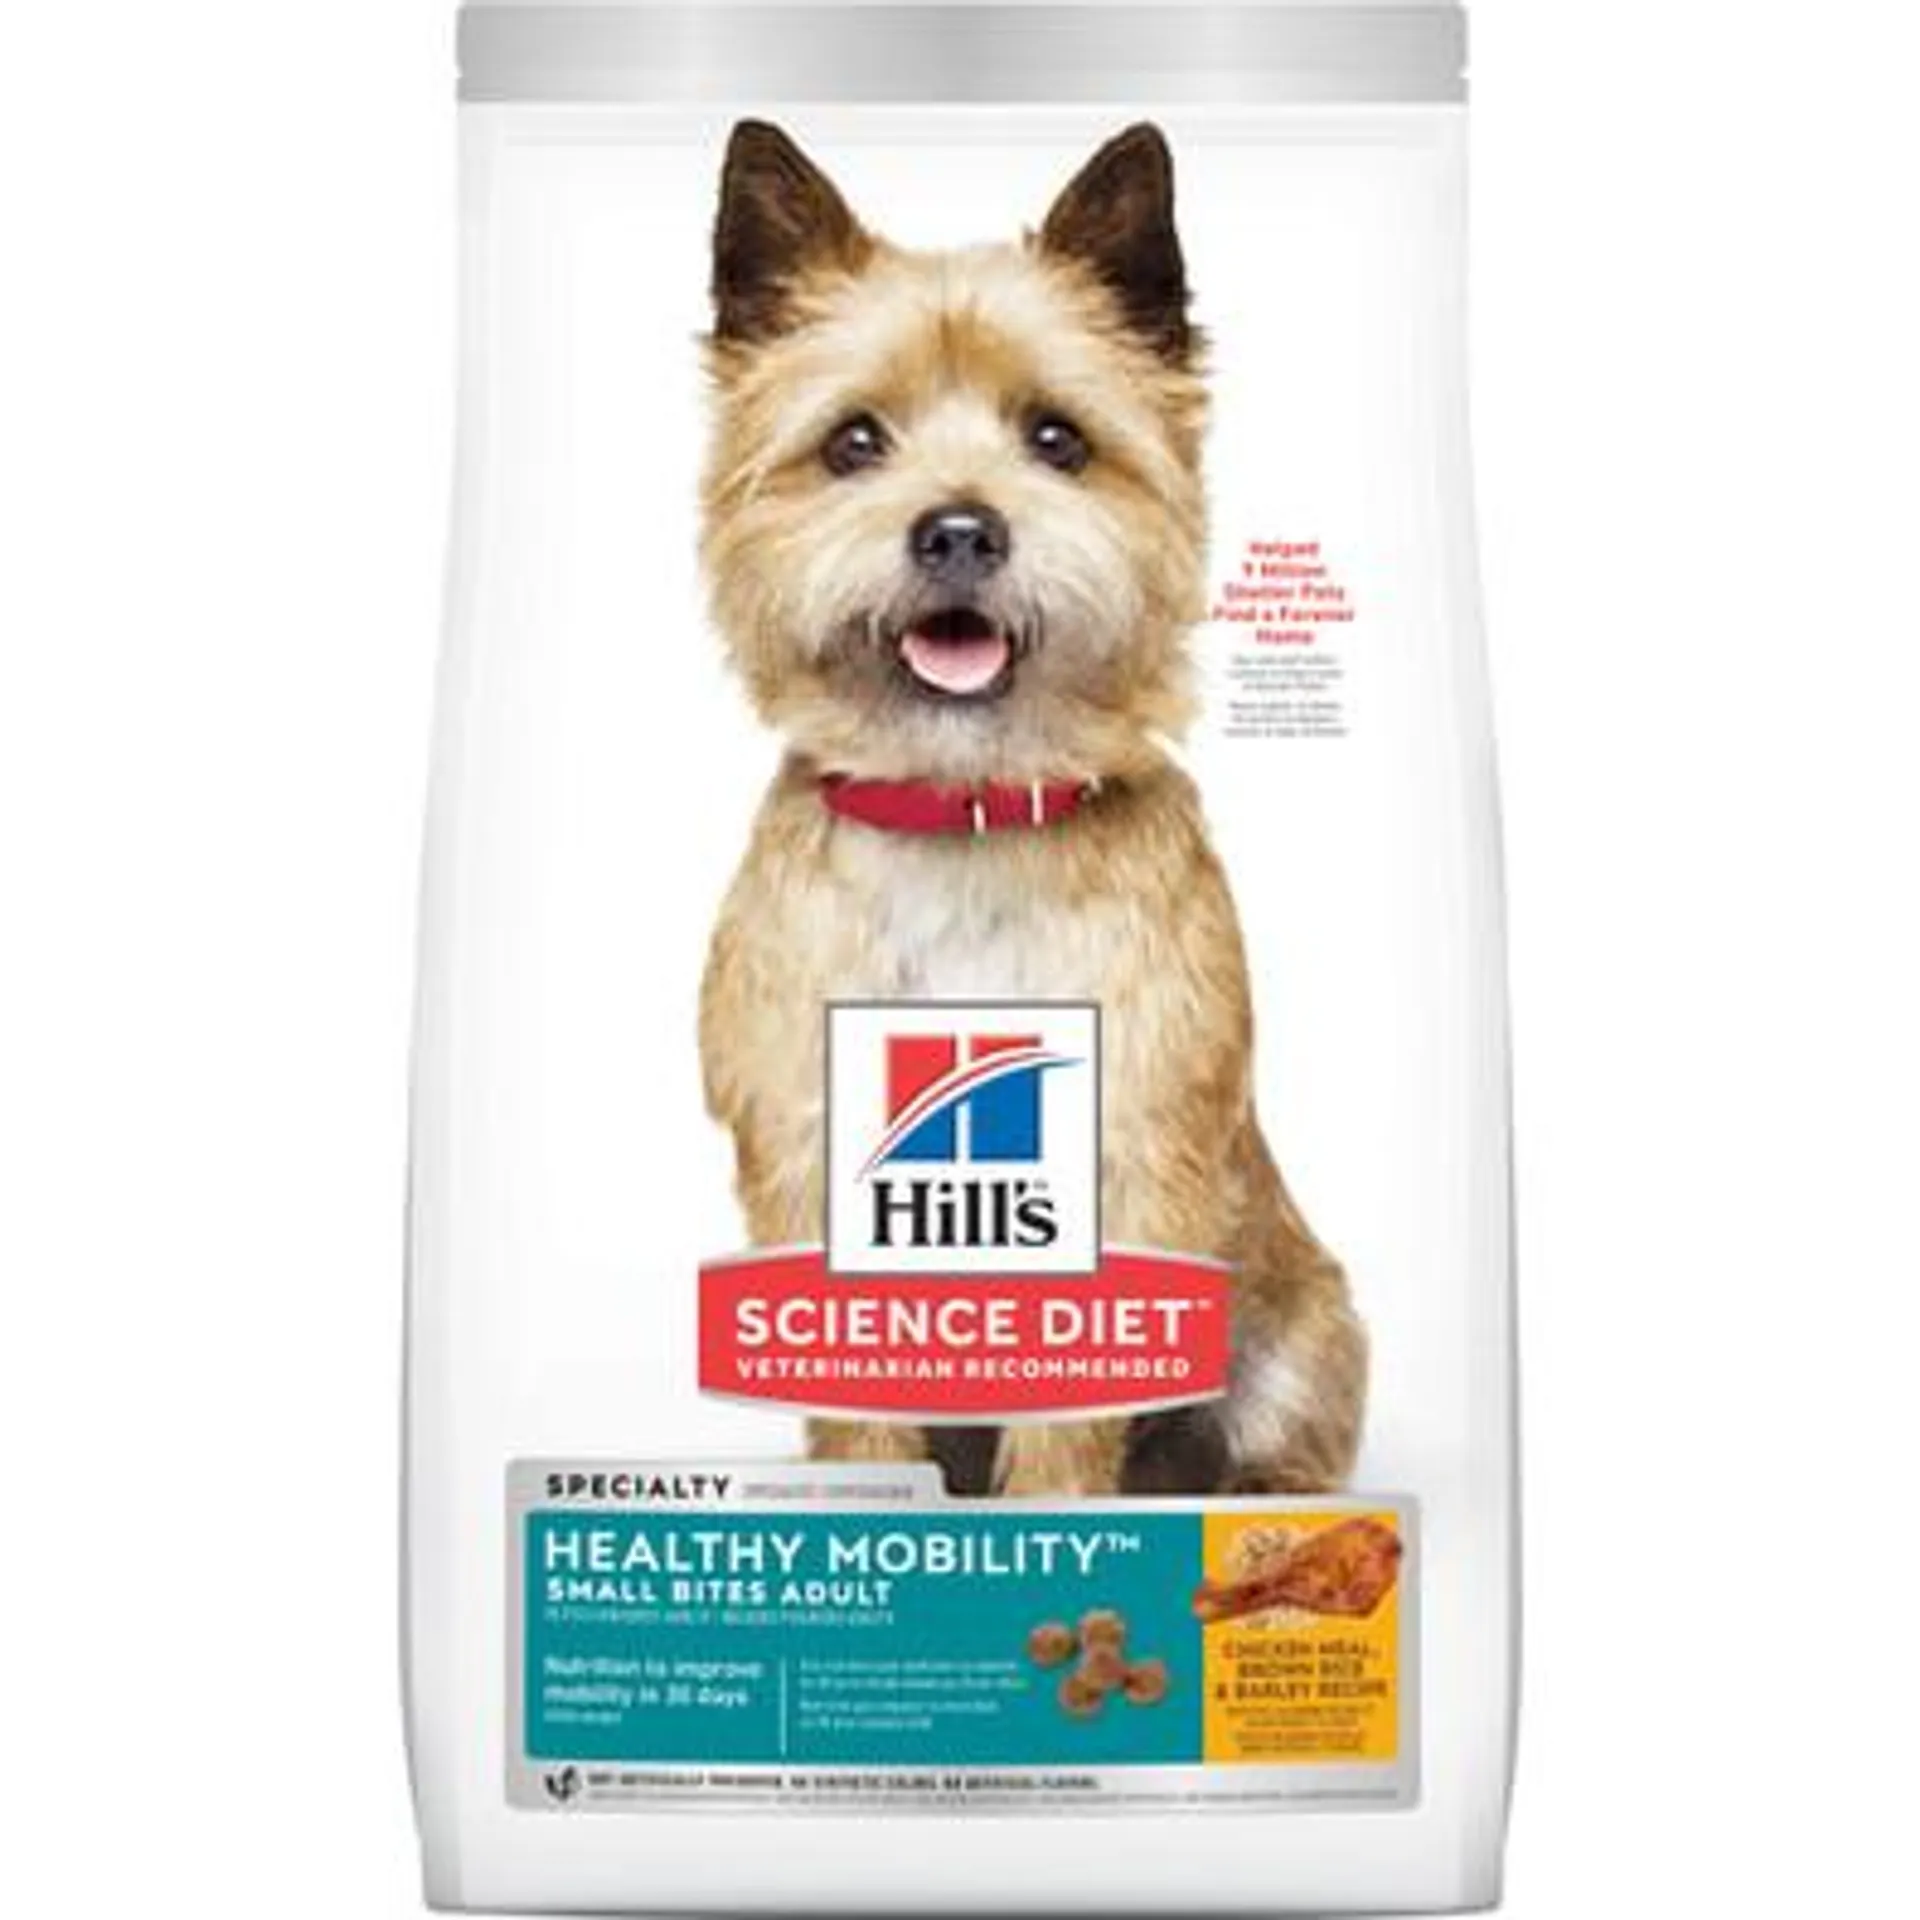 Hill's Science Diet Healthy Mobility Small Bites Adult Dry Dog Food